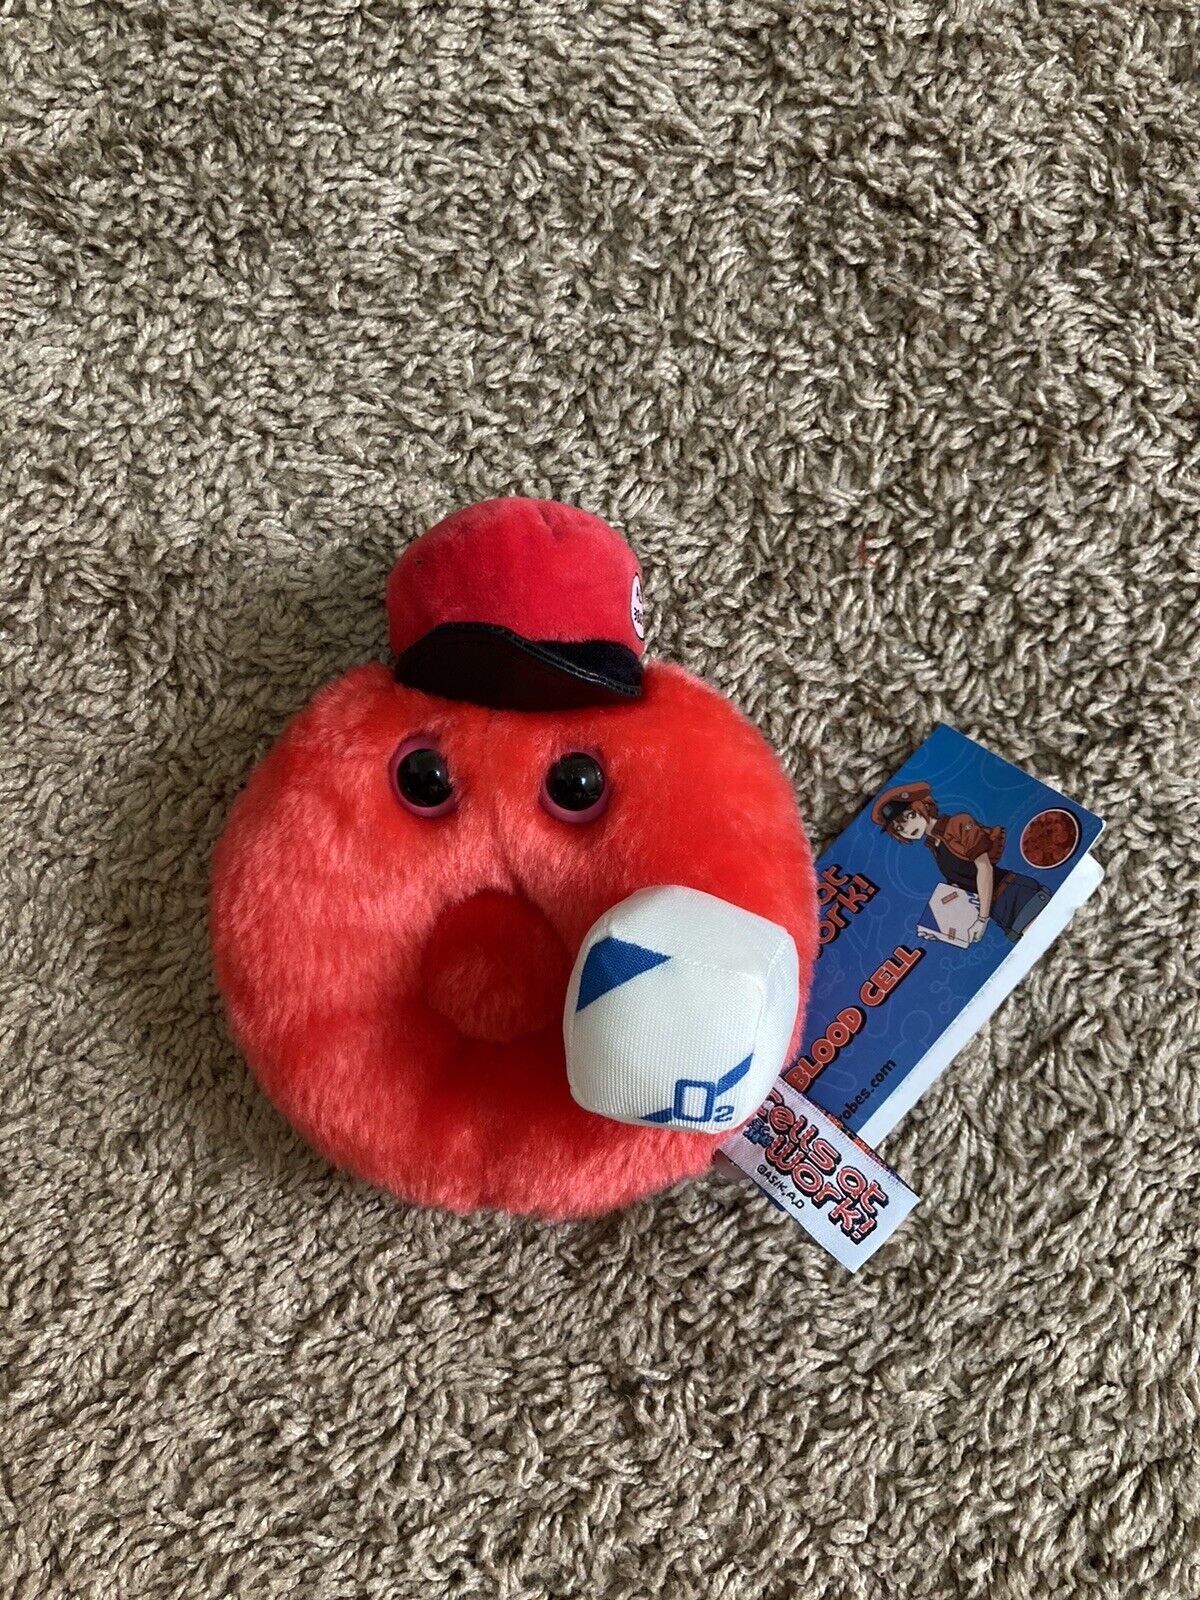 Cells At Work Red Blood Cell Plush 6” Aniplex Giant Microbes With Tags AE3803